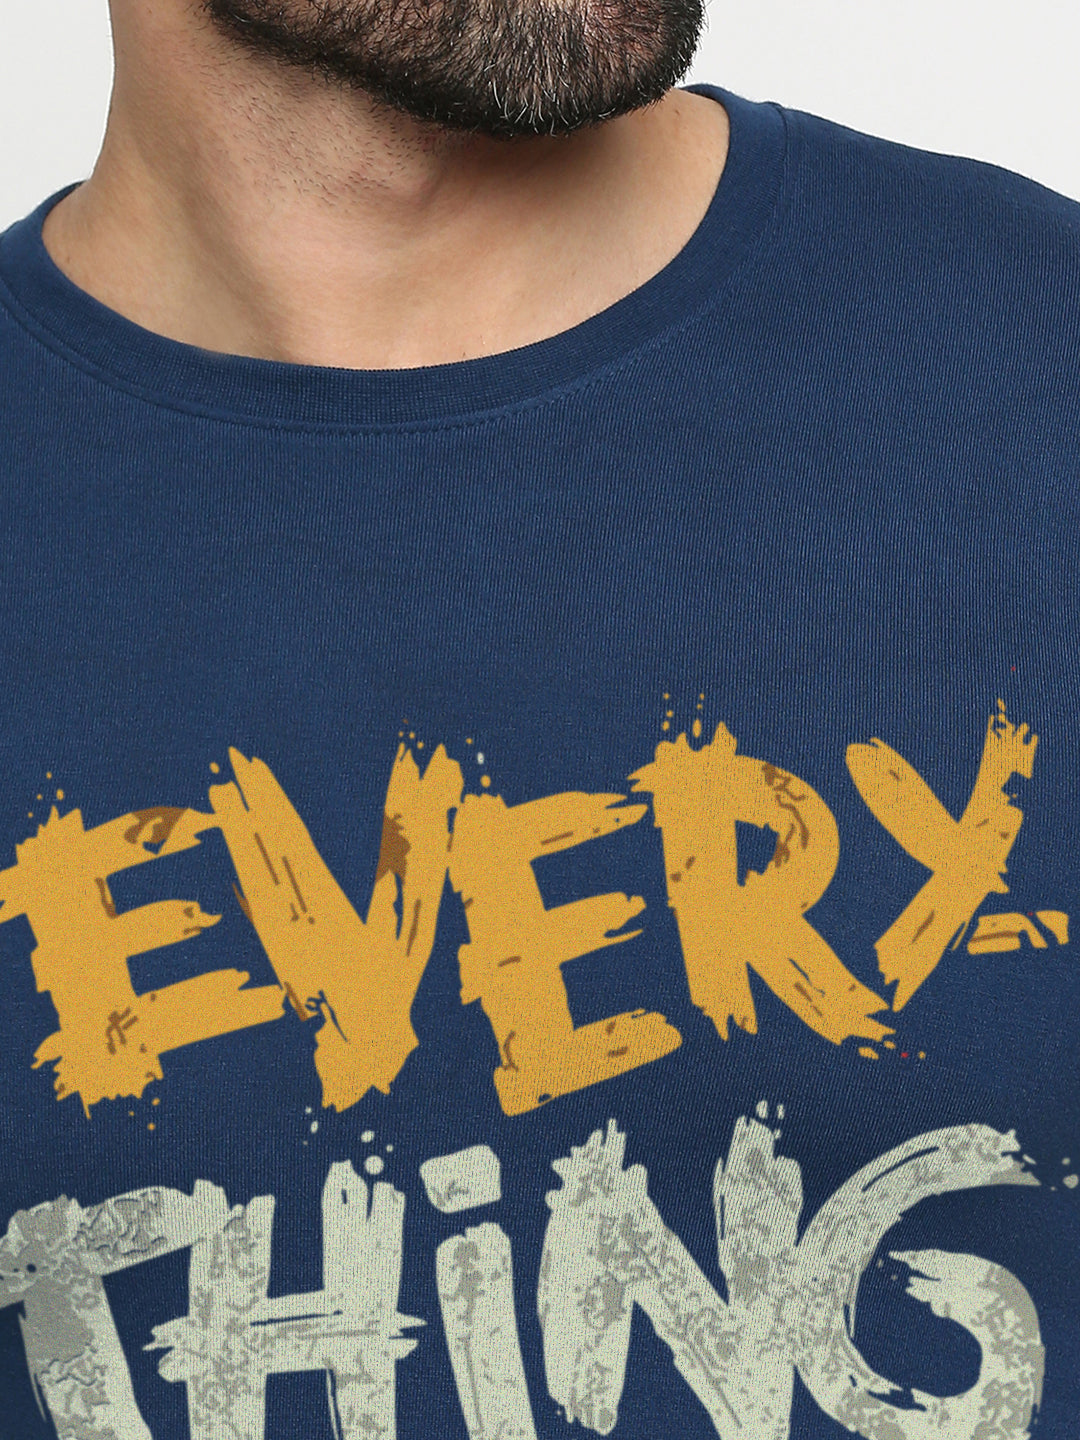 Everything Will Be Okay T-Shirt